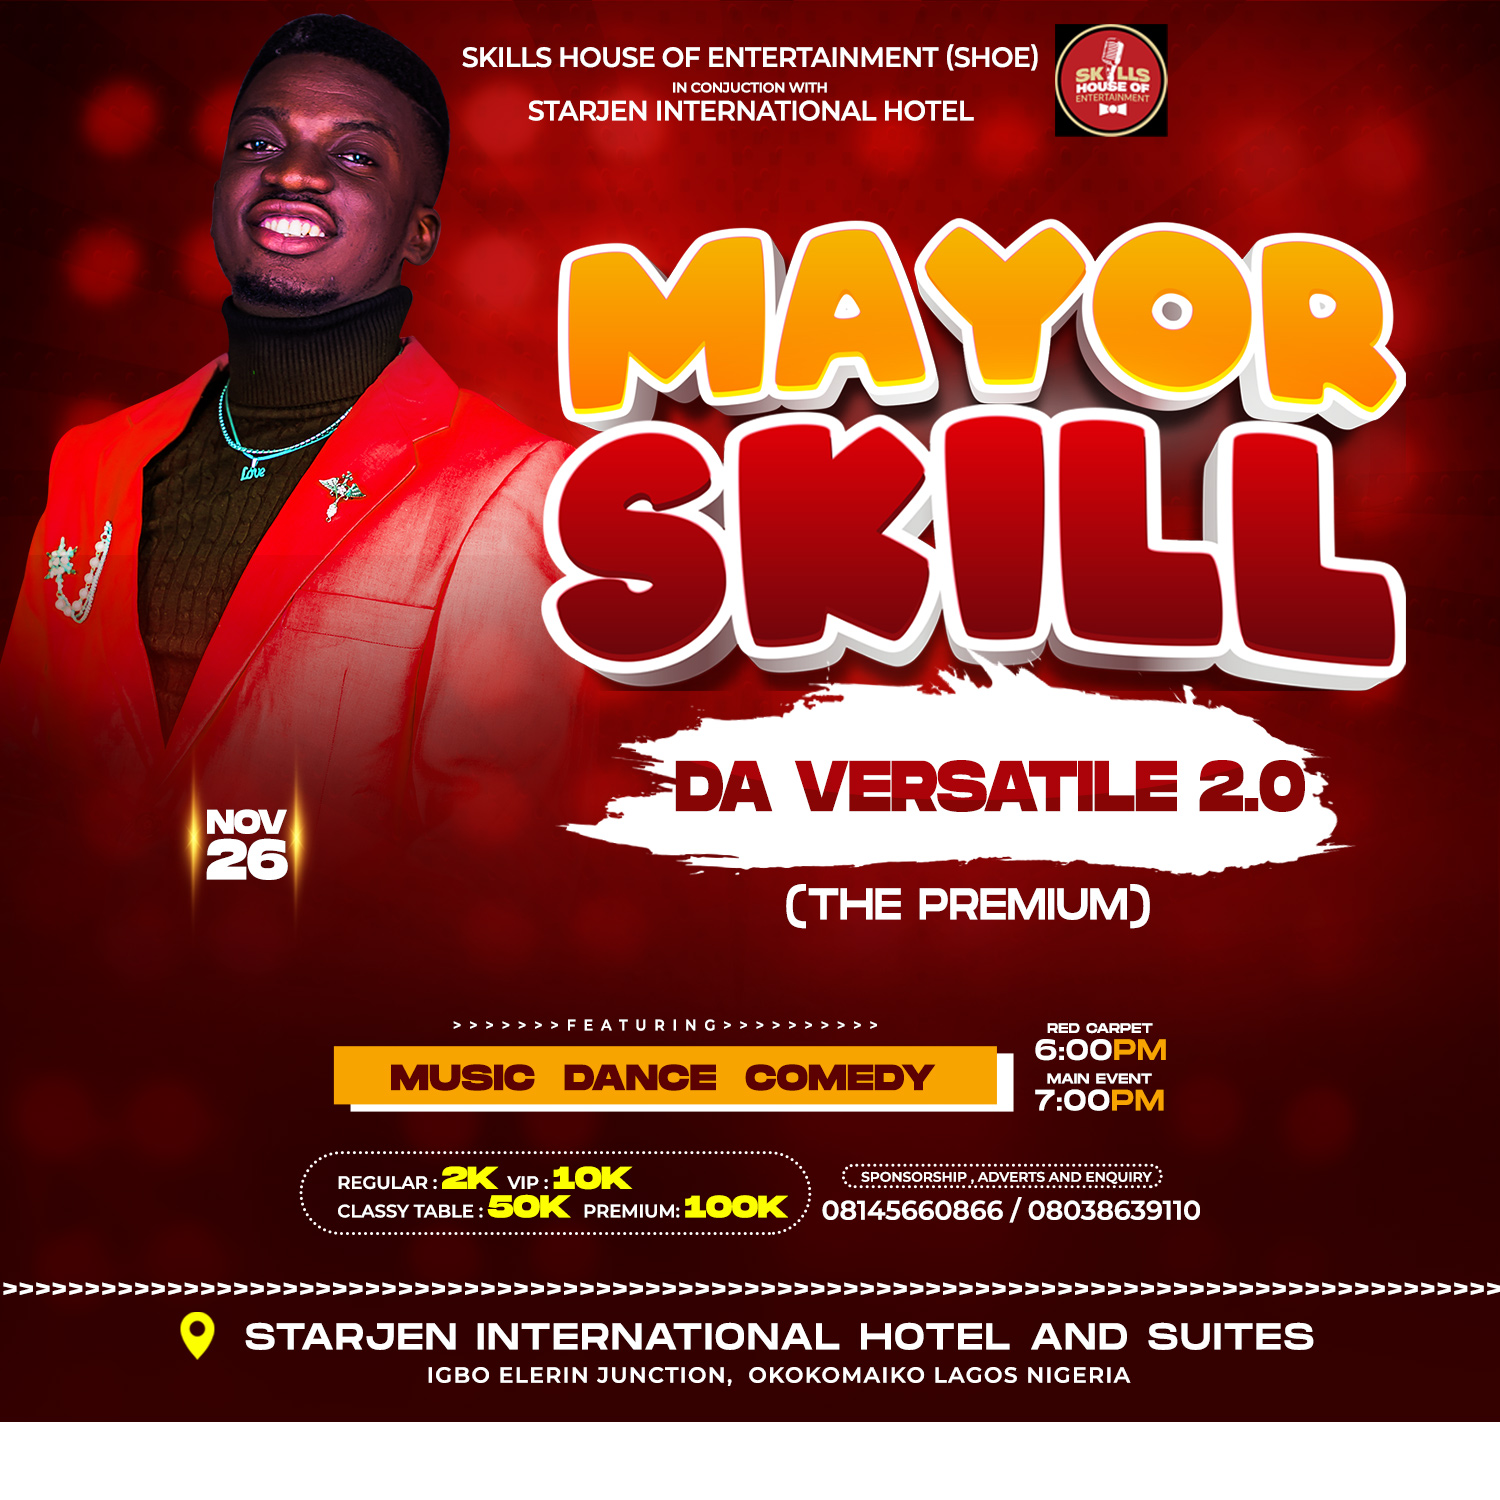 MAYORSKILL DA VERSATILE (THE PREMIUM) Post free event in Nigeria using tickethub.ng, buy and sell tickets to event